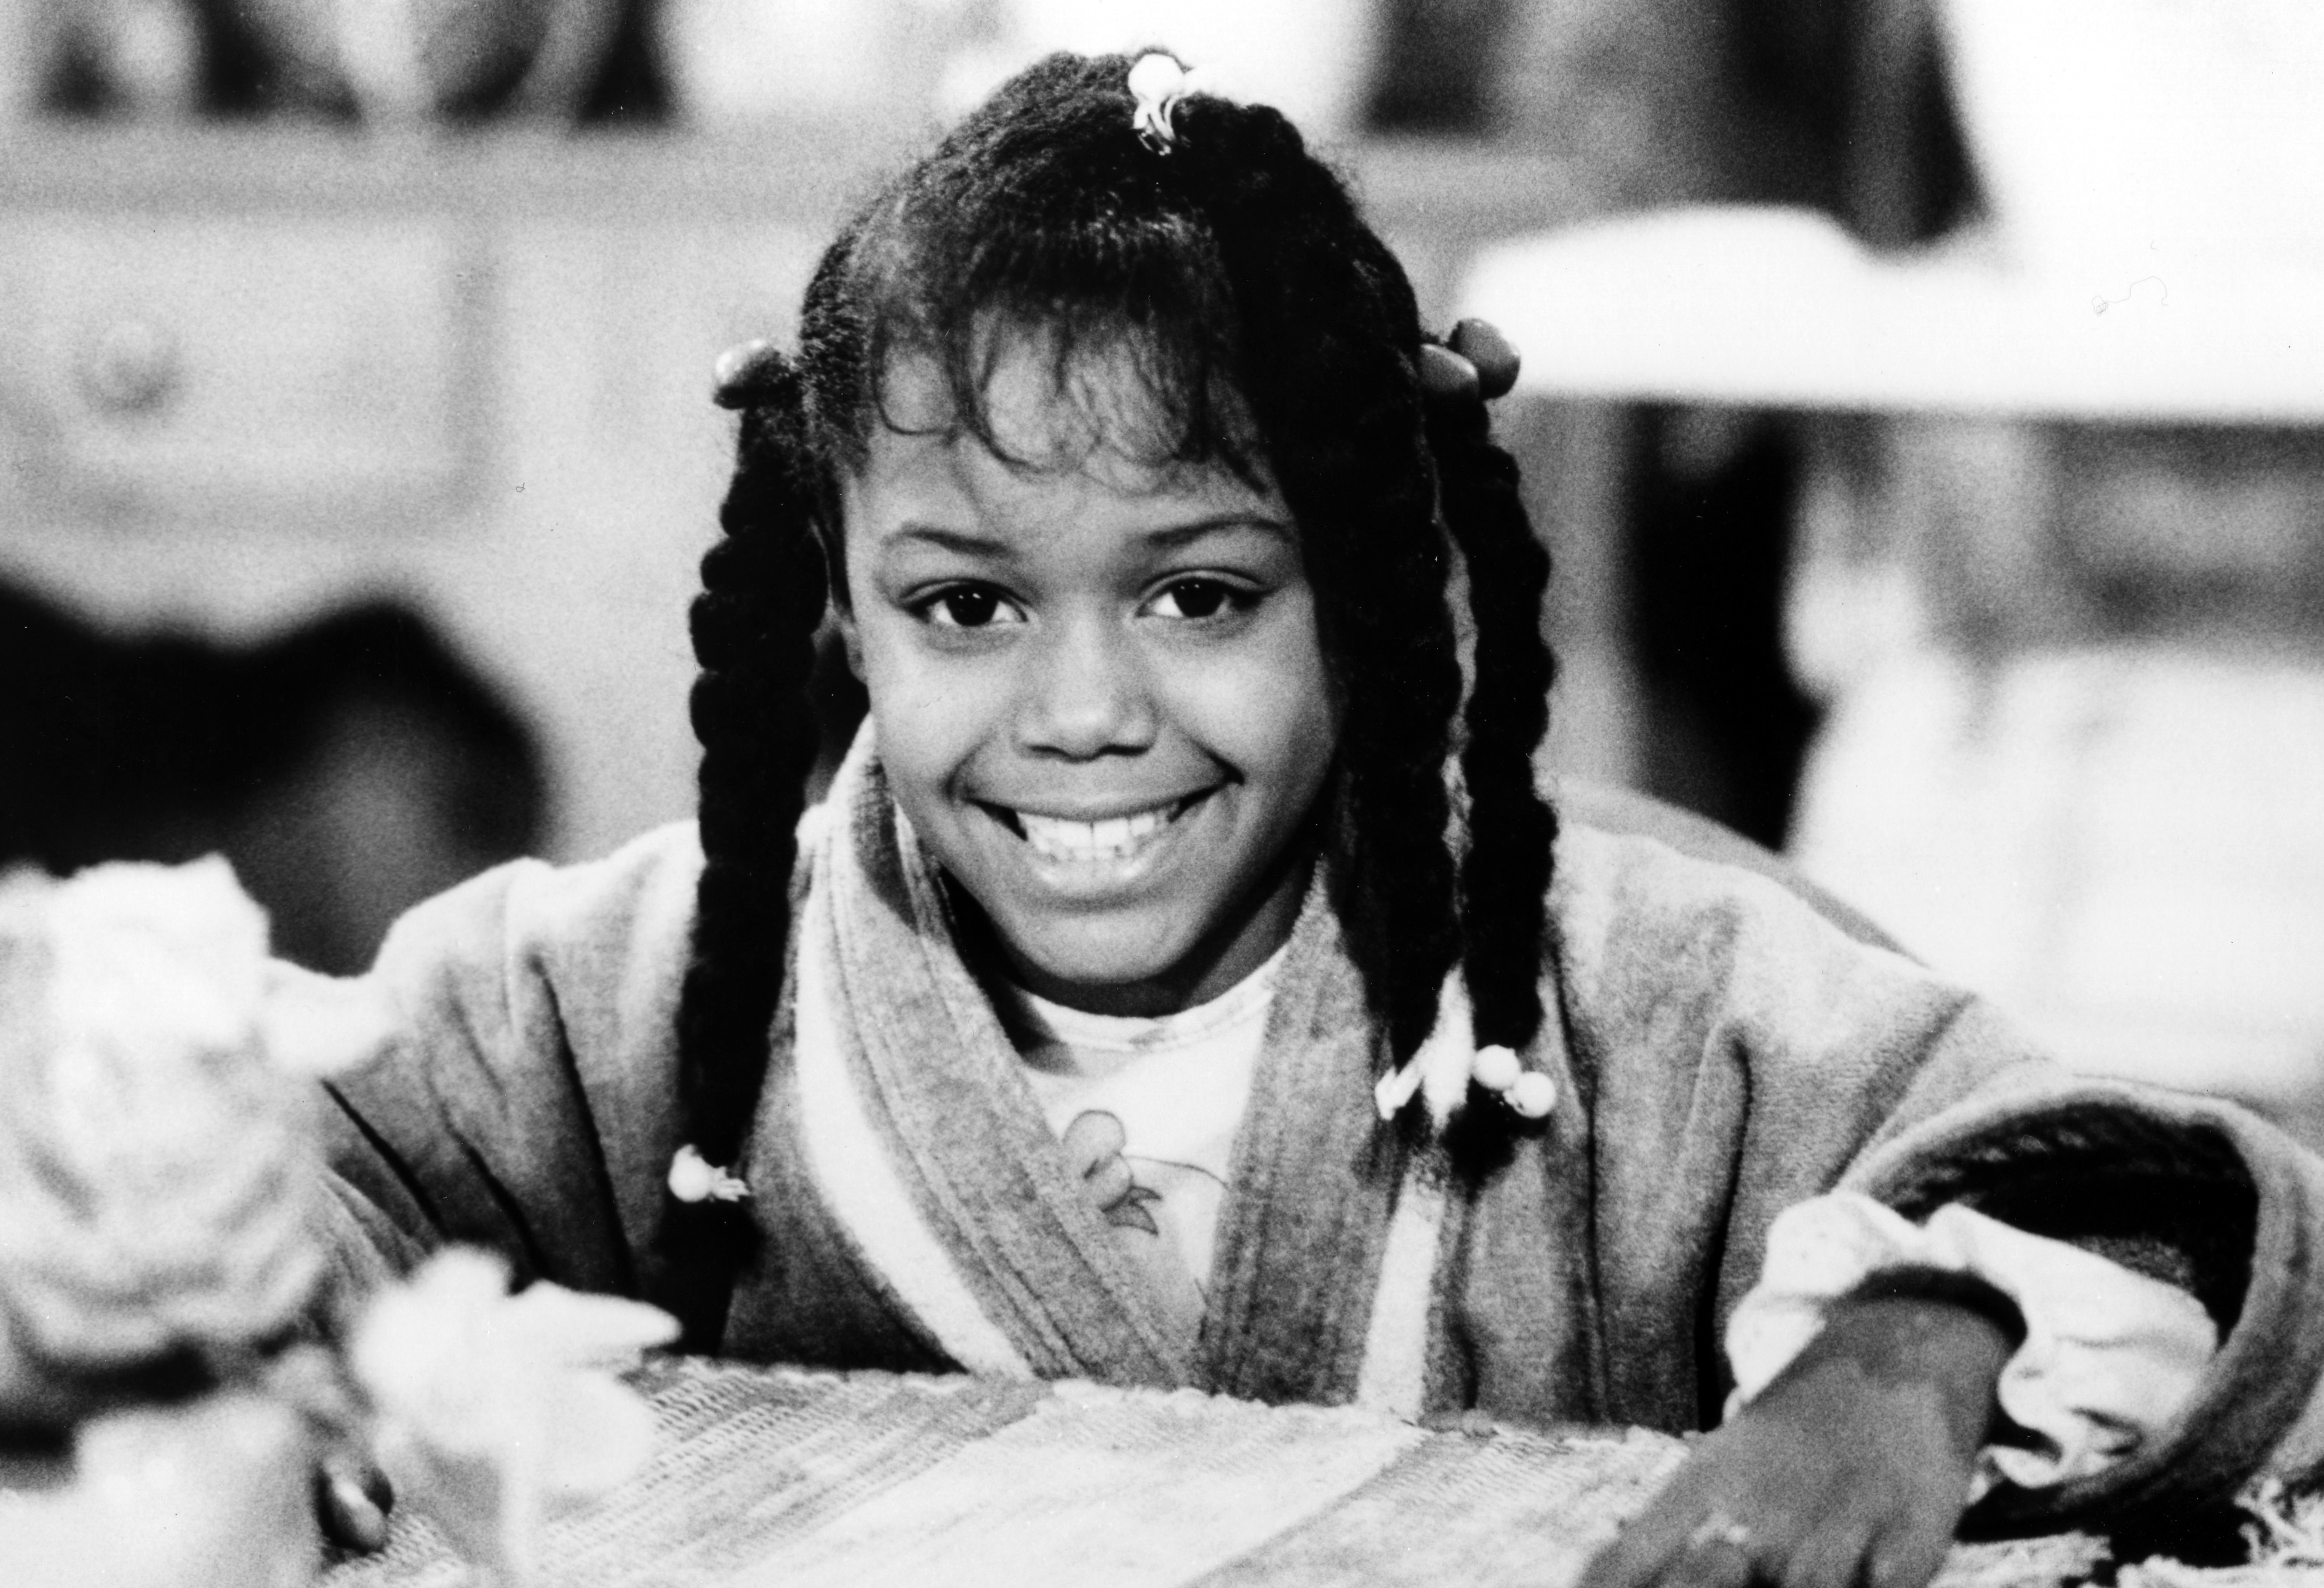 Child star Jaimee Foxworth on set in November 1989. | Source: Getty Images